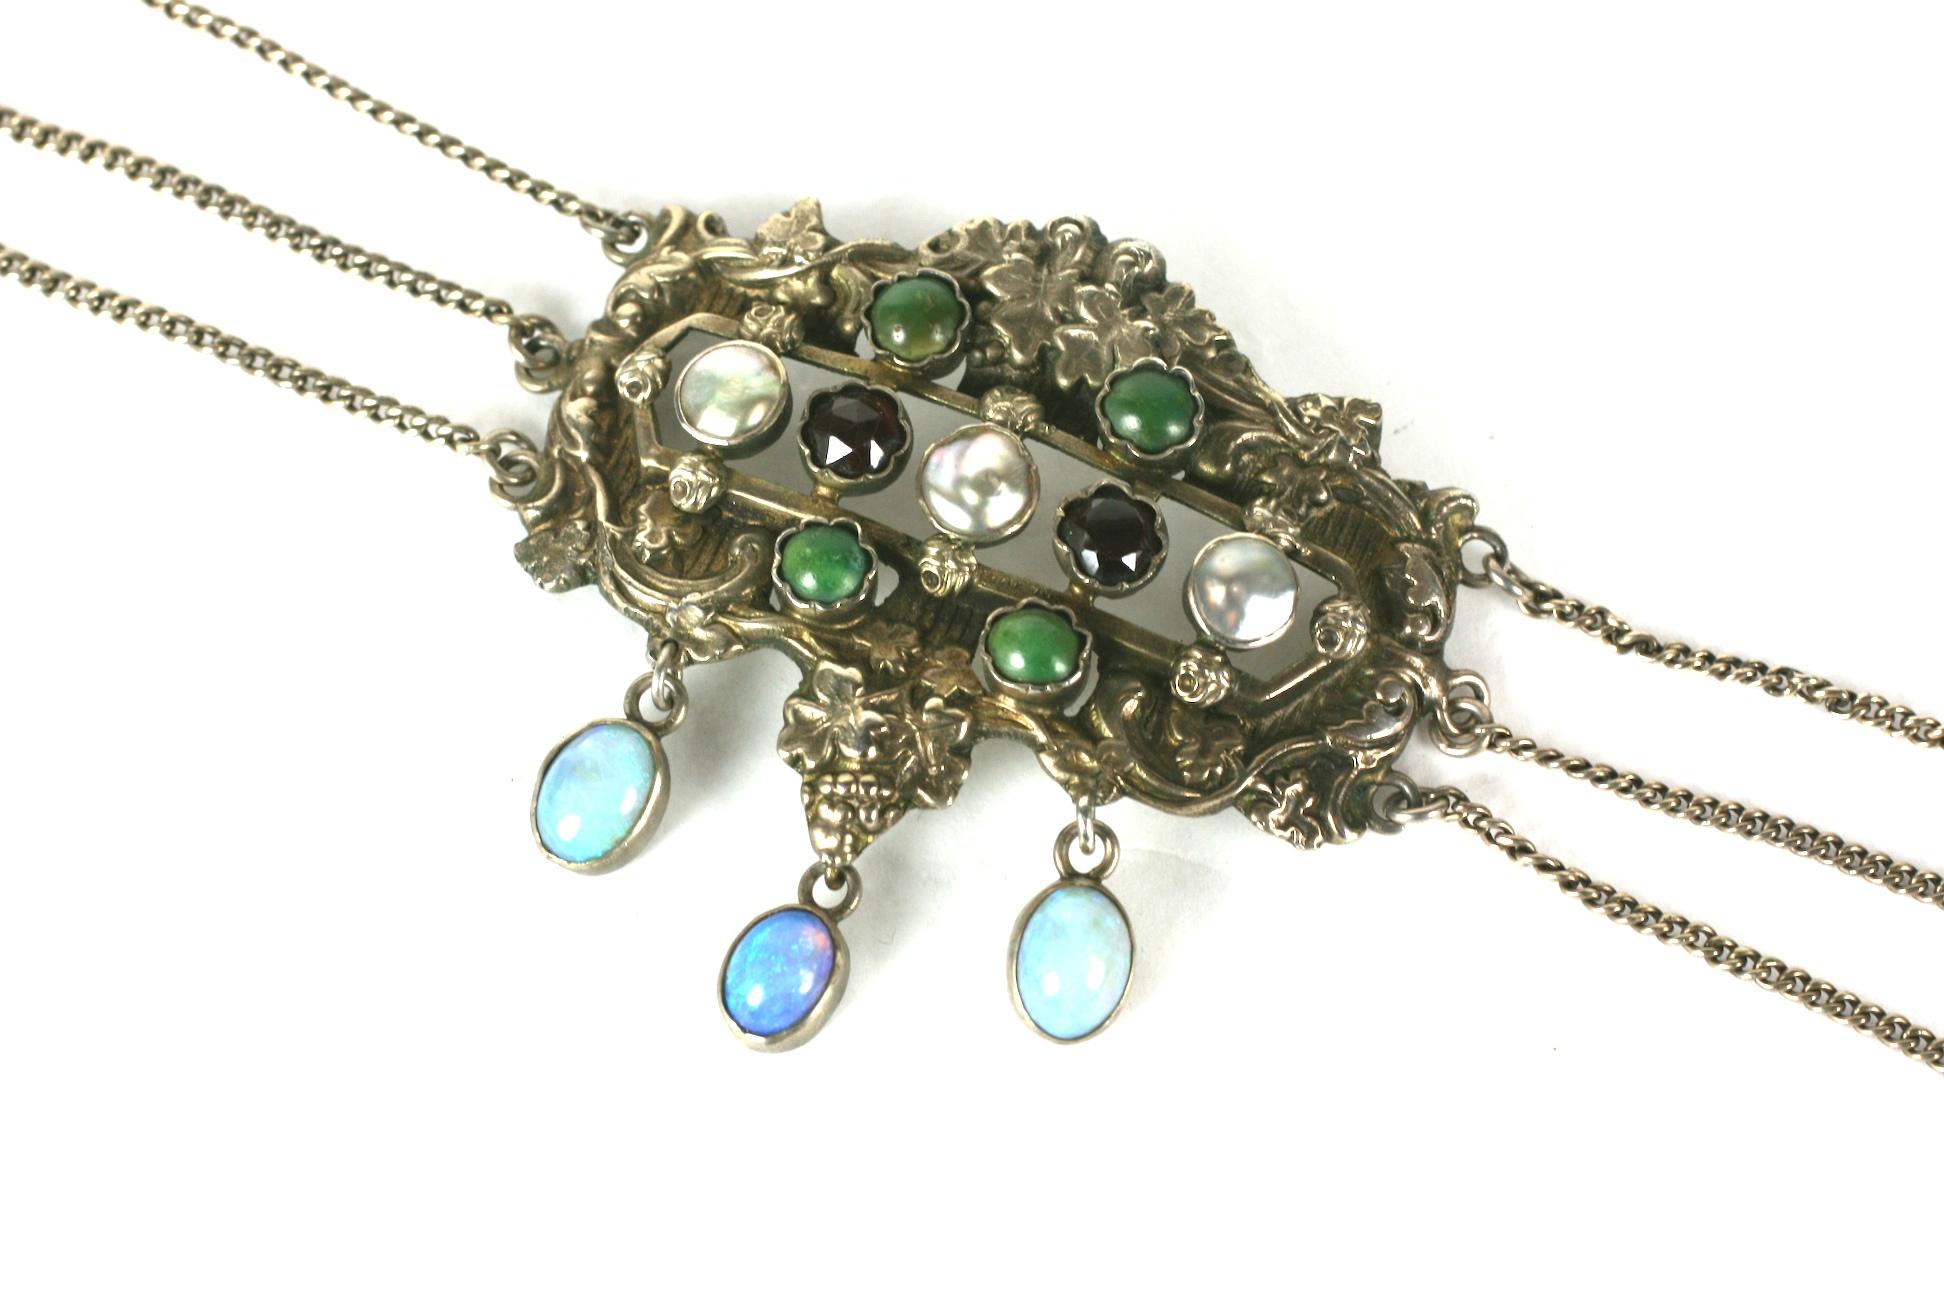 19th Century Hungarian necklace of gilt silver with jeweled central plaque of garnets, mother of pearl, green turquoises with 3 opal drops. Motifs include vines and grape clusters.
3 chains hold the plaque from each side and have lozenge shaped